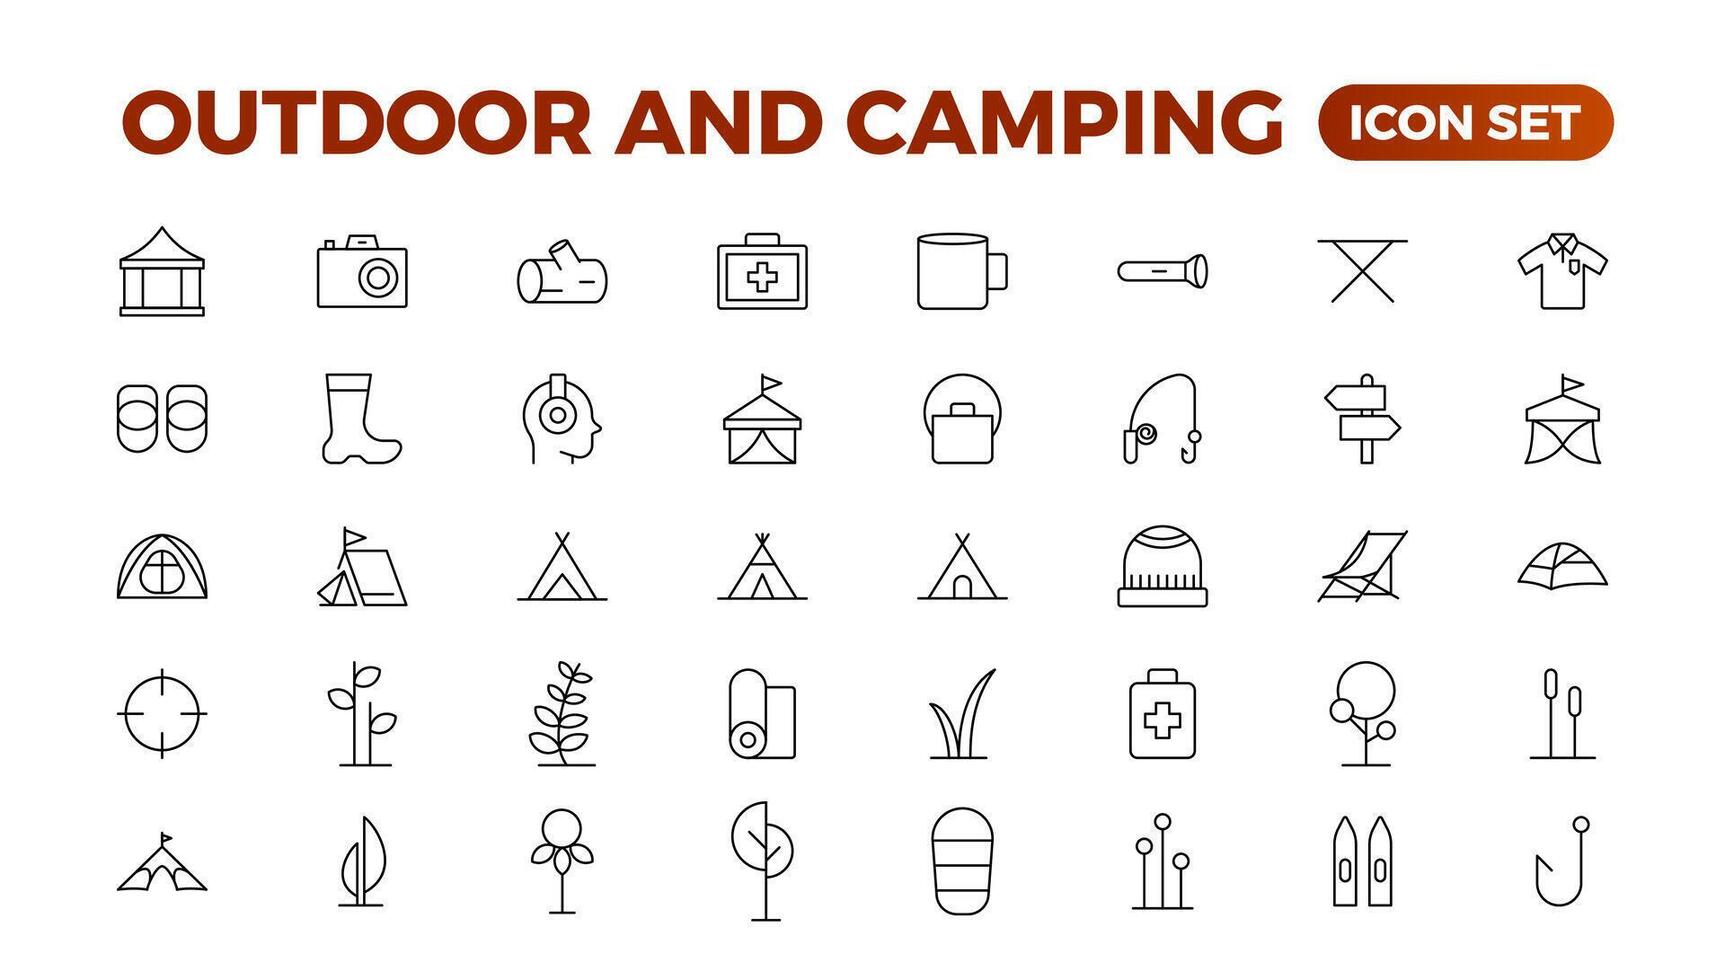 Food and nutrition, Outdoor and camping icon set vector